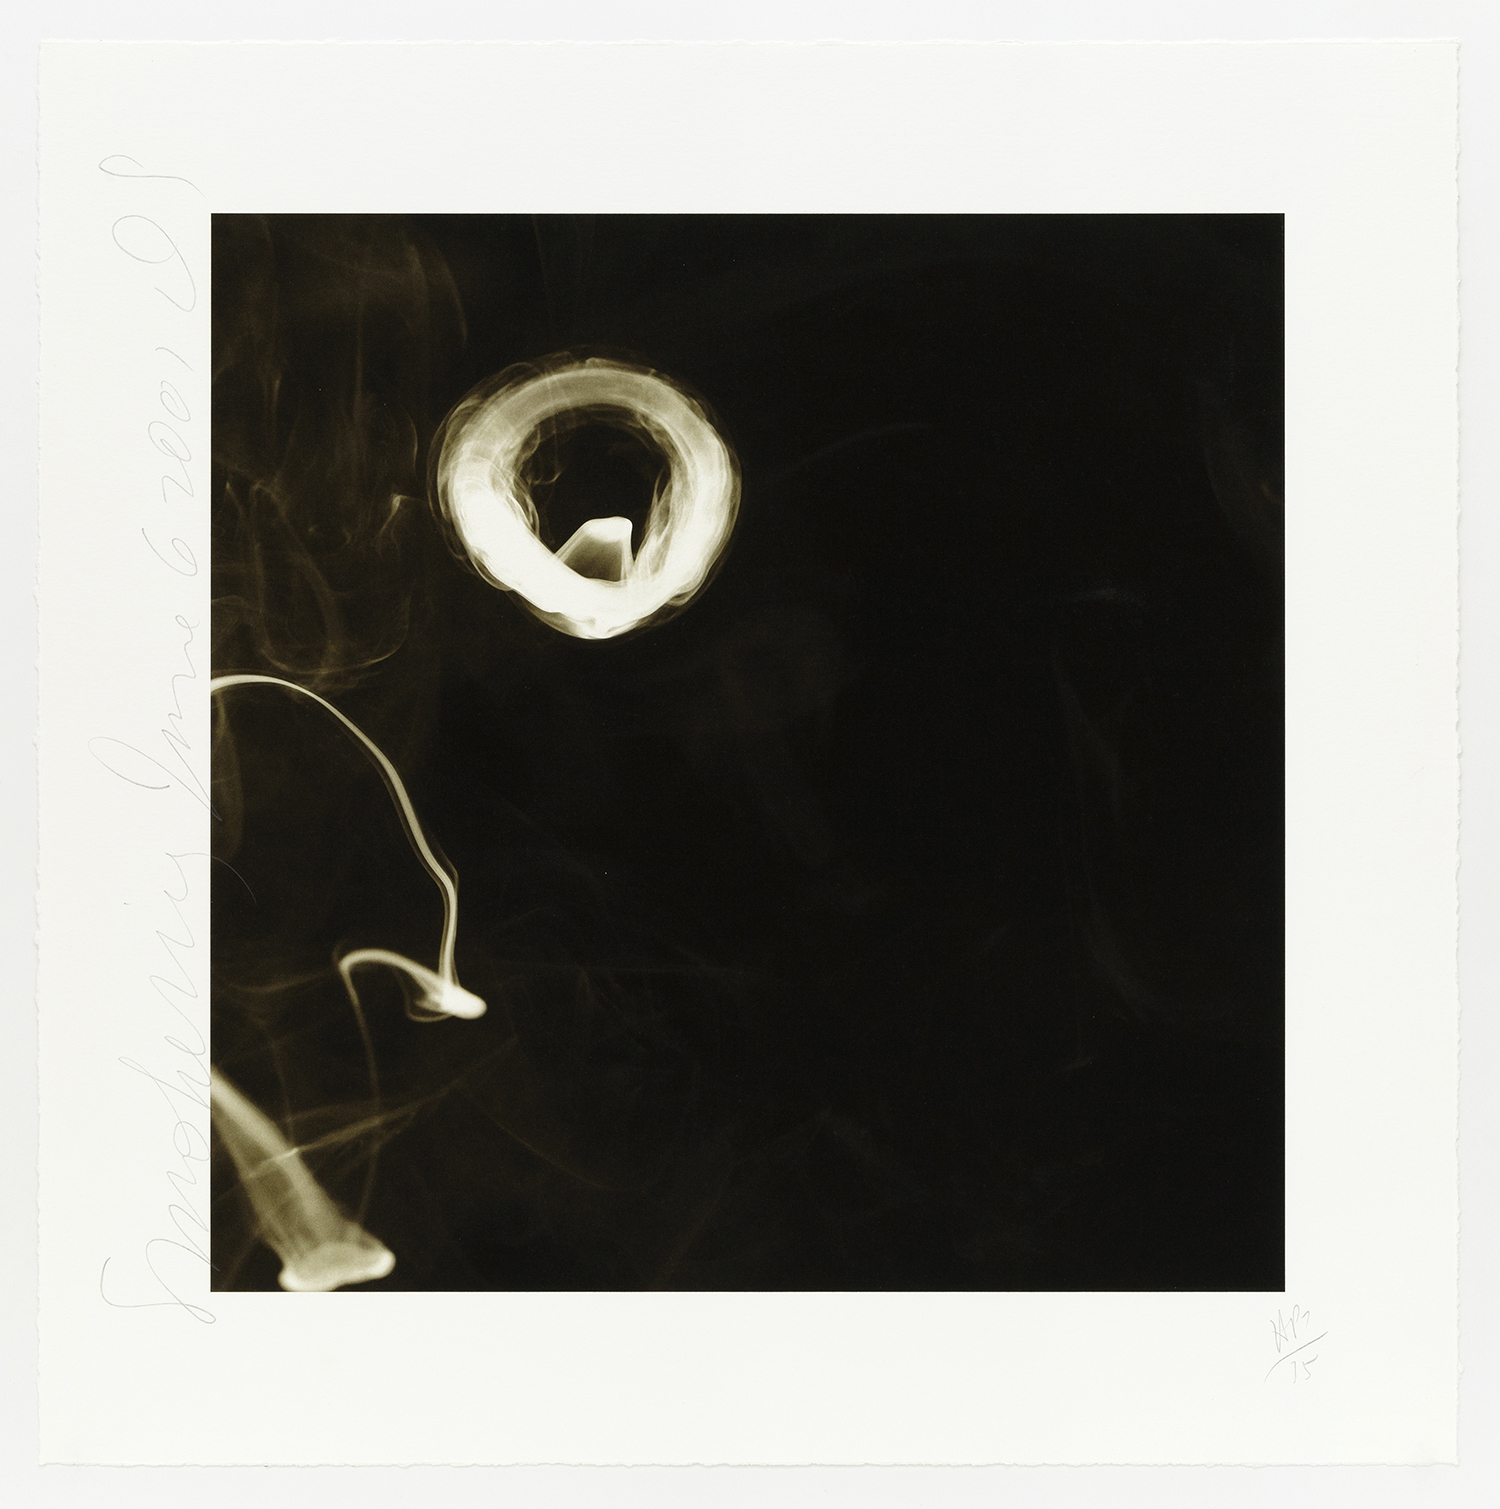 Smoke Rings, June 6, 2001, Digital inkjet, 22 1/2 x 22 1/2 inches (57.2 x 57.2 cm), Edition of 75